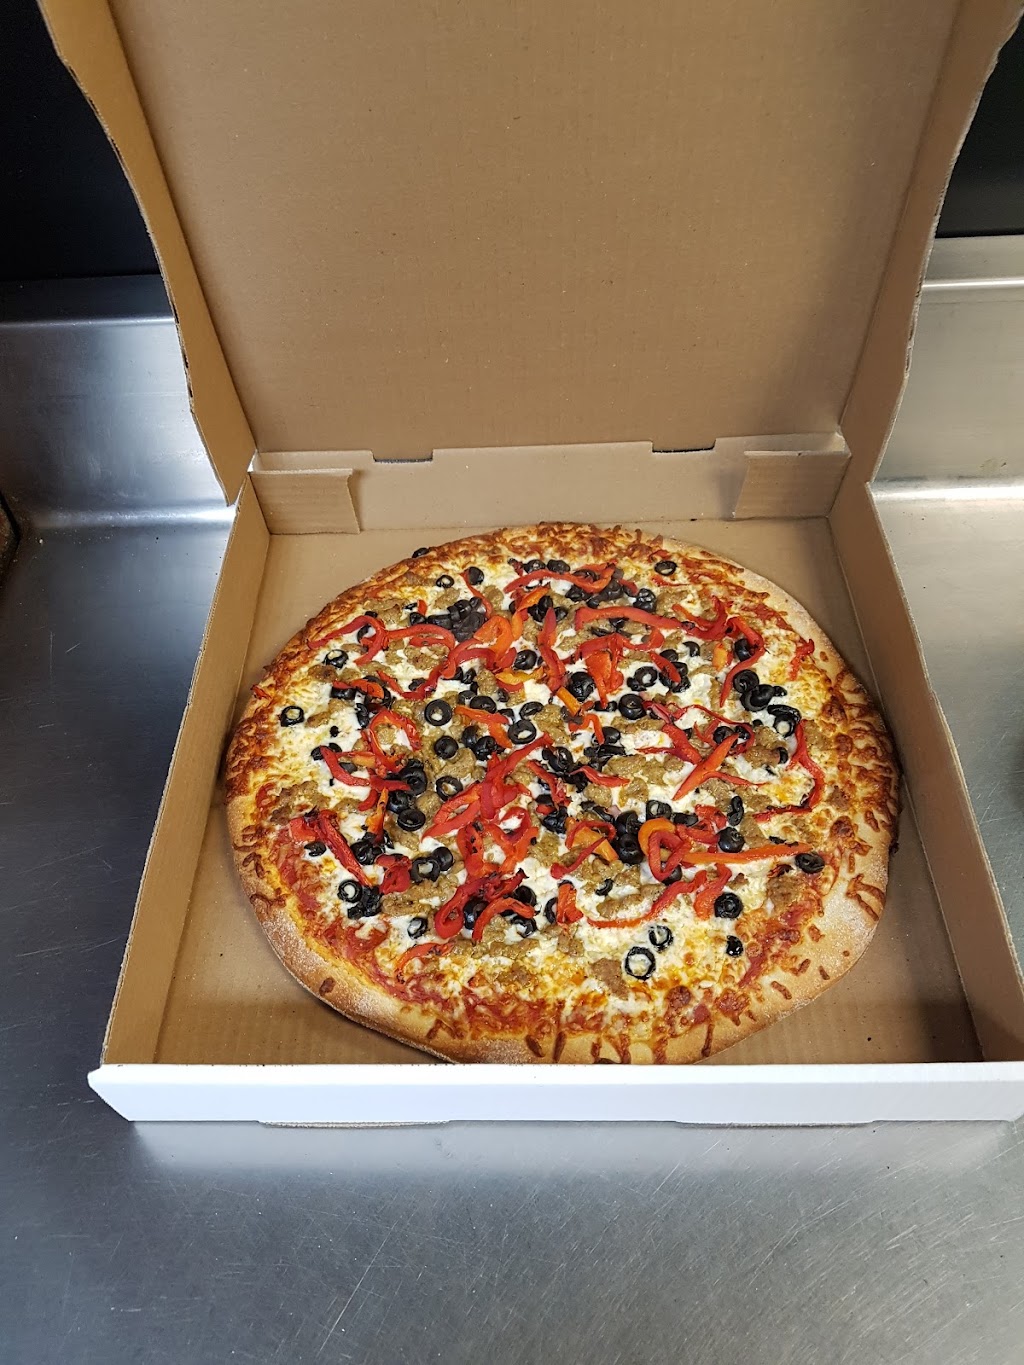 The Pizza Stak | 3934 Victoria Ave, Vineland, ON L0R 2C0, Canada | Phone: (905) 562-1234